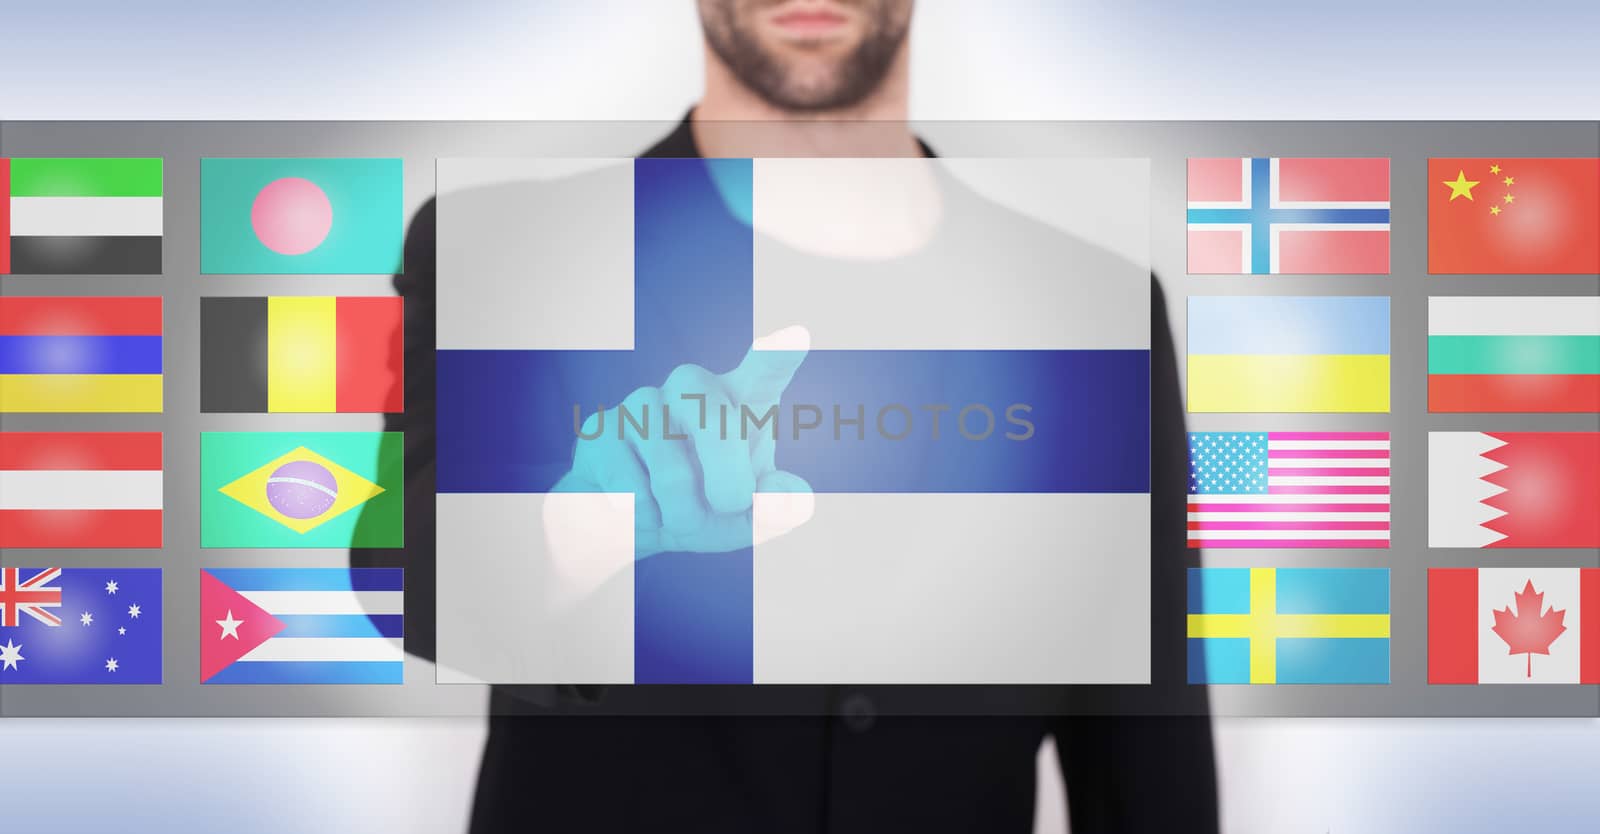 Hand pushing on a touch screen interface, choosing language or country, Finland